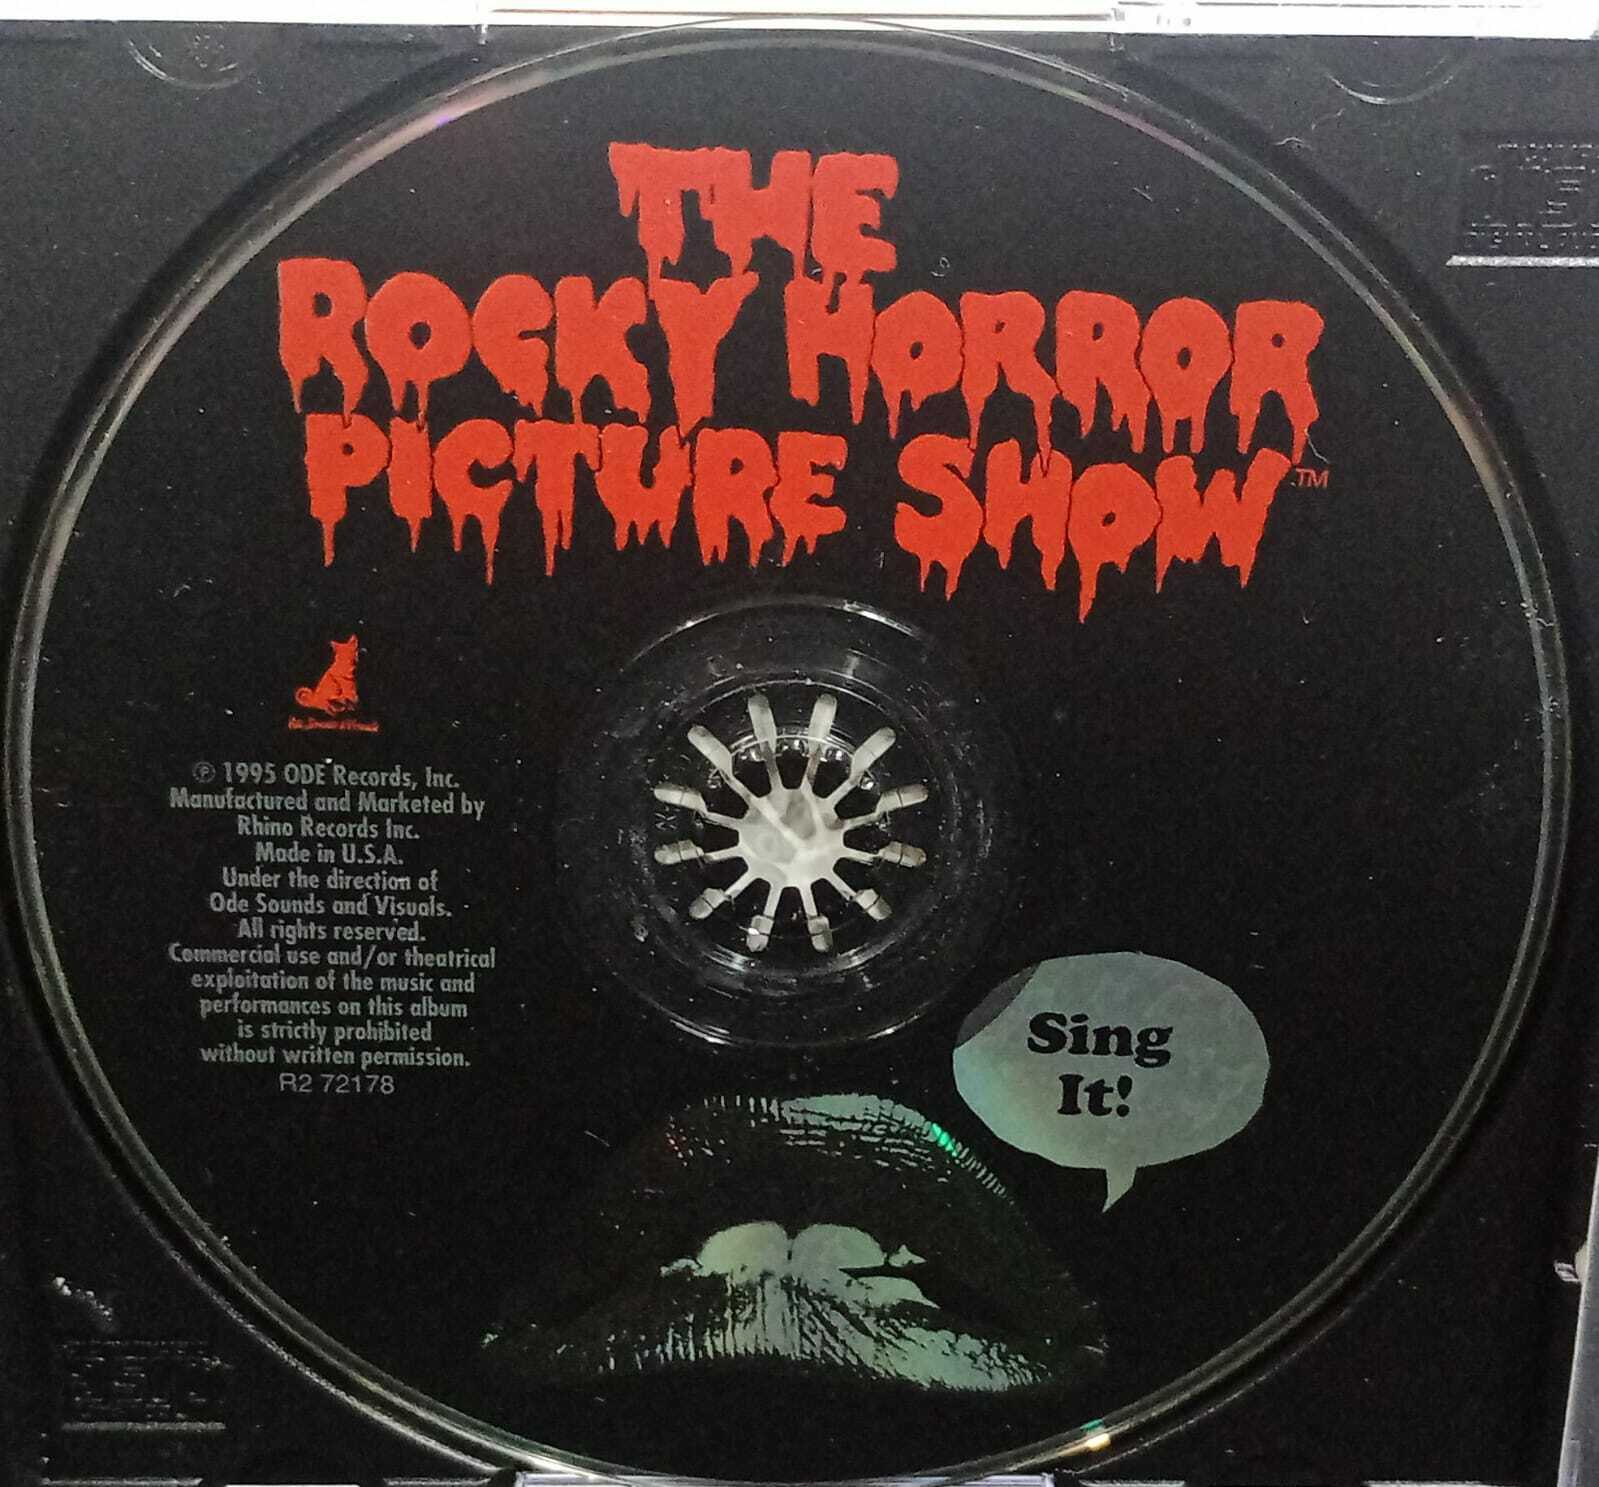 CD - Rocky Horror Picture Show Original Cast The Sing It (USA)